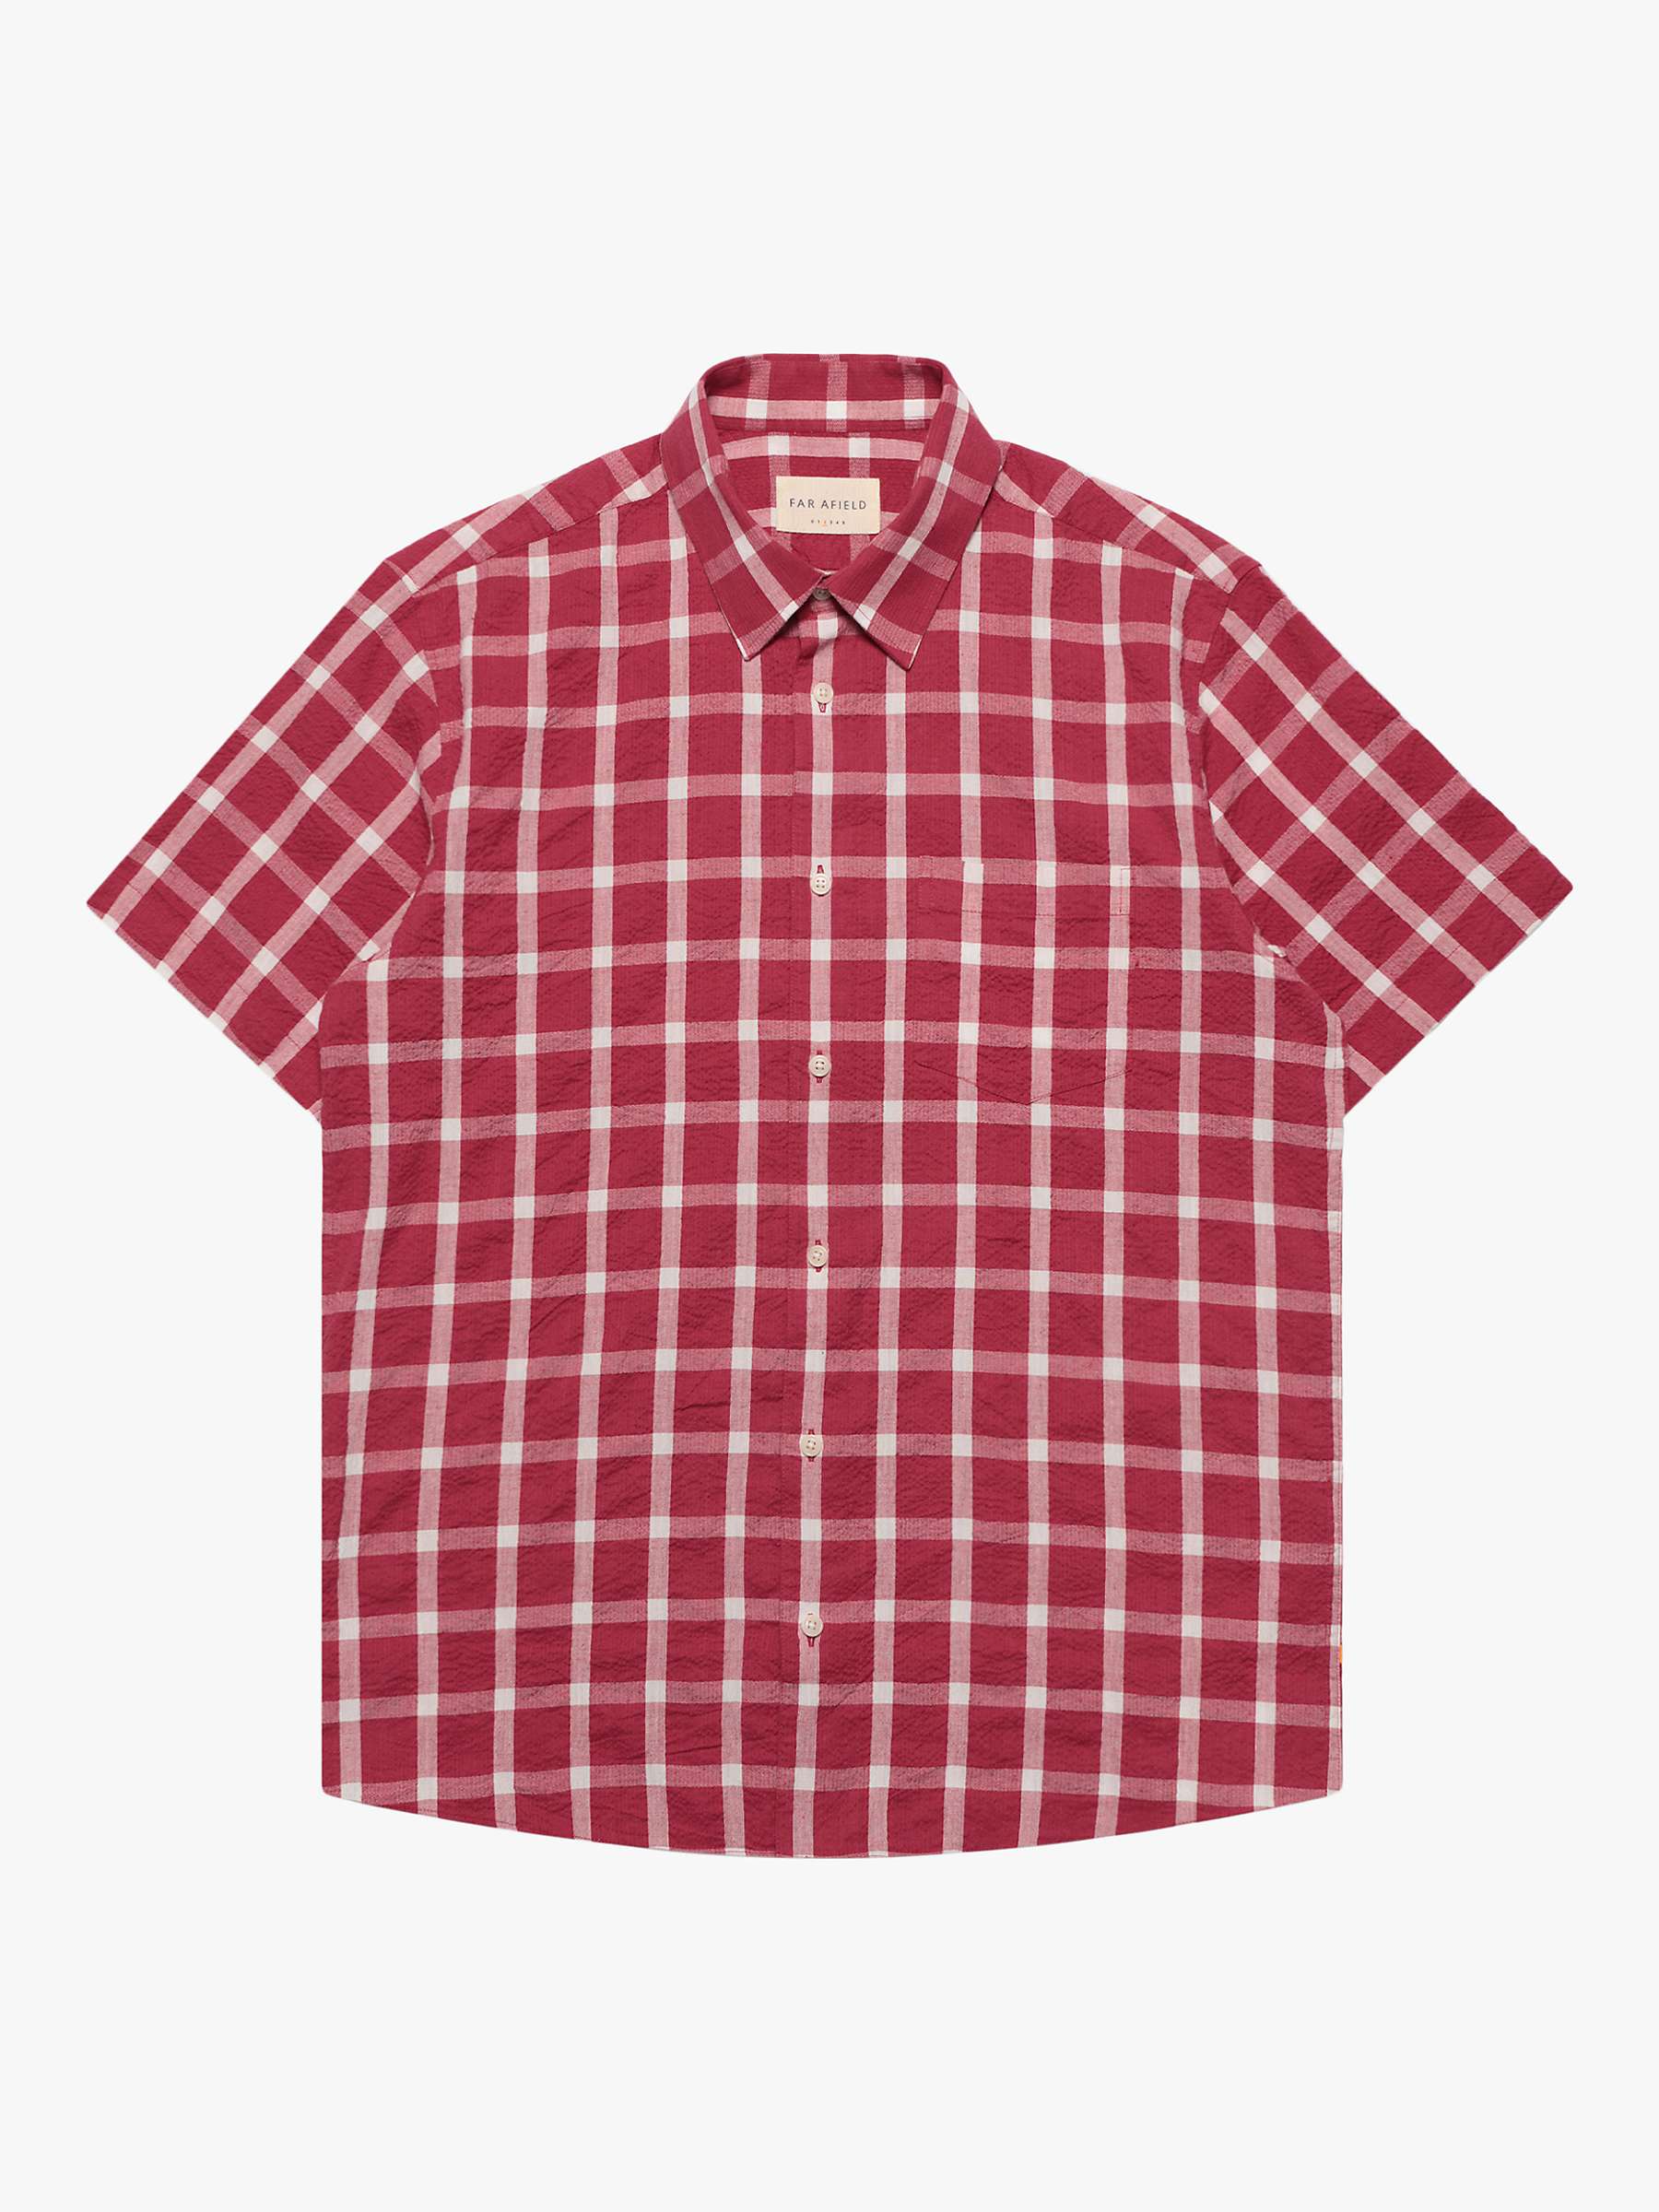 Buy Far Afield Classic Checked Short Sleeve Shirt, Red/Multi Online at johnlewis.com